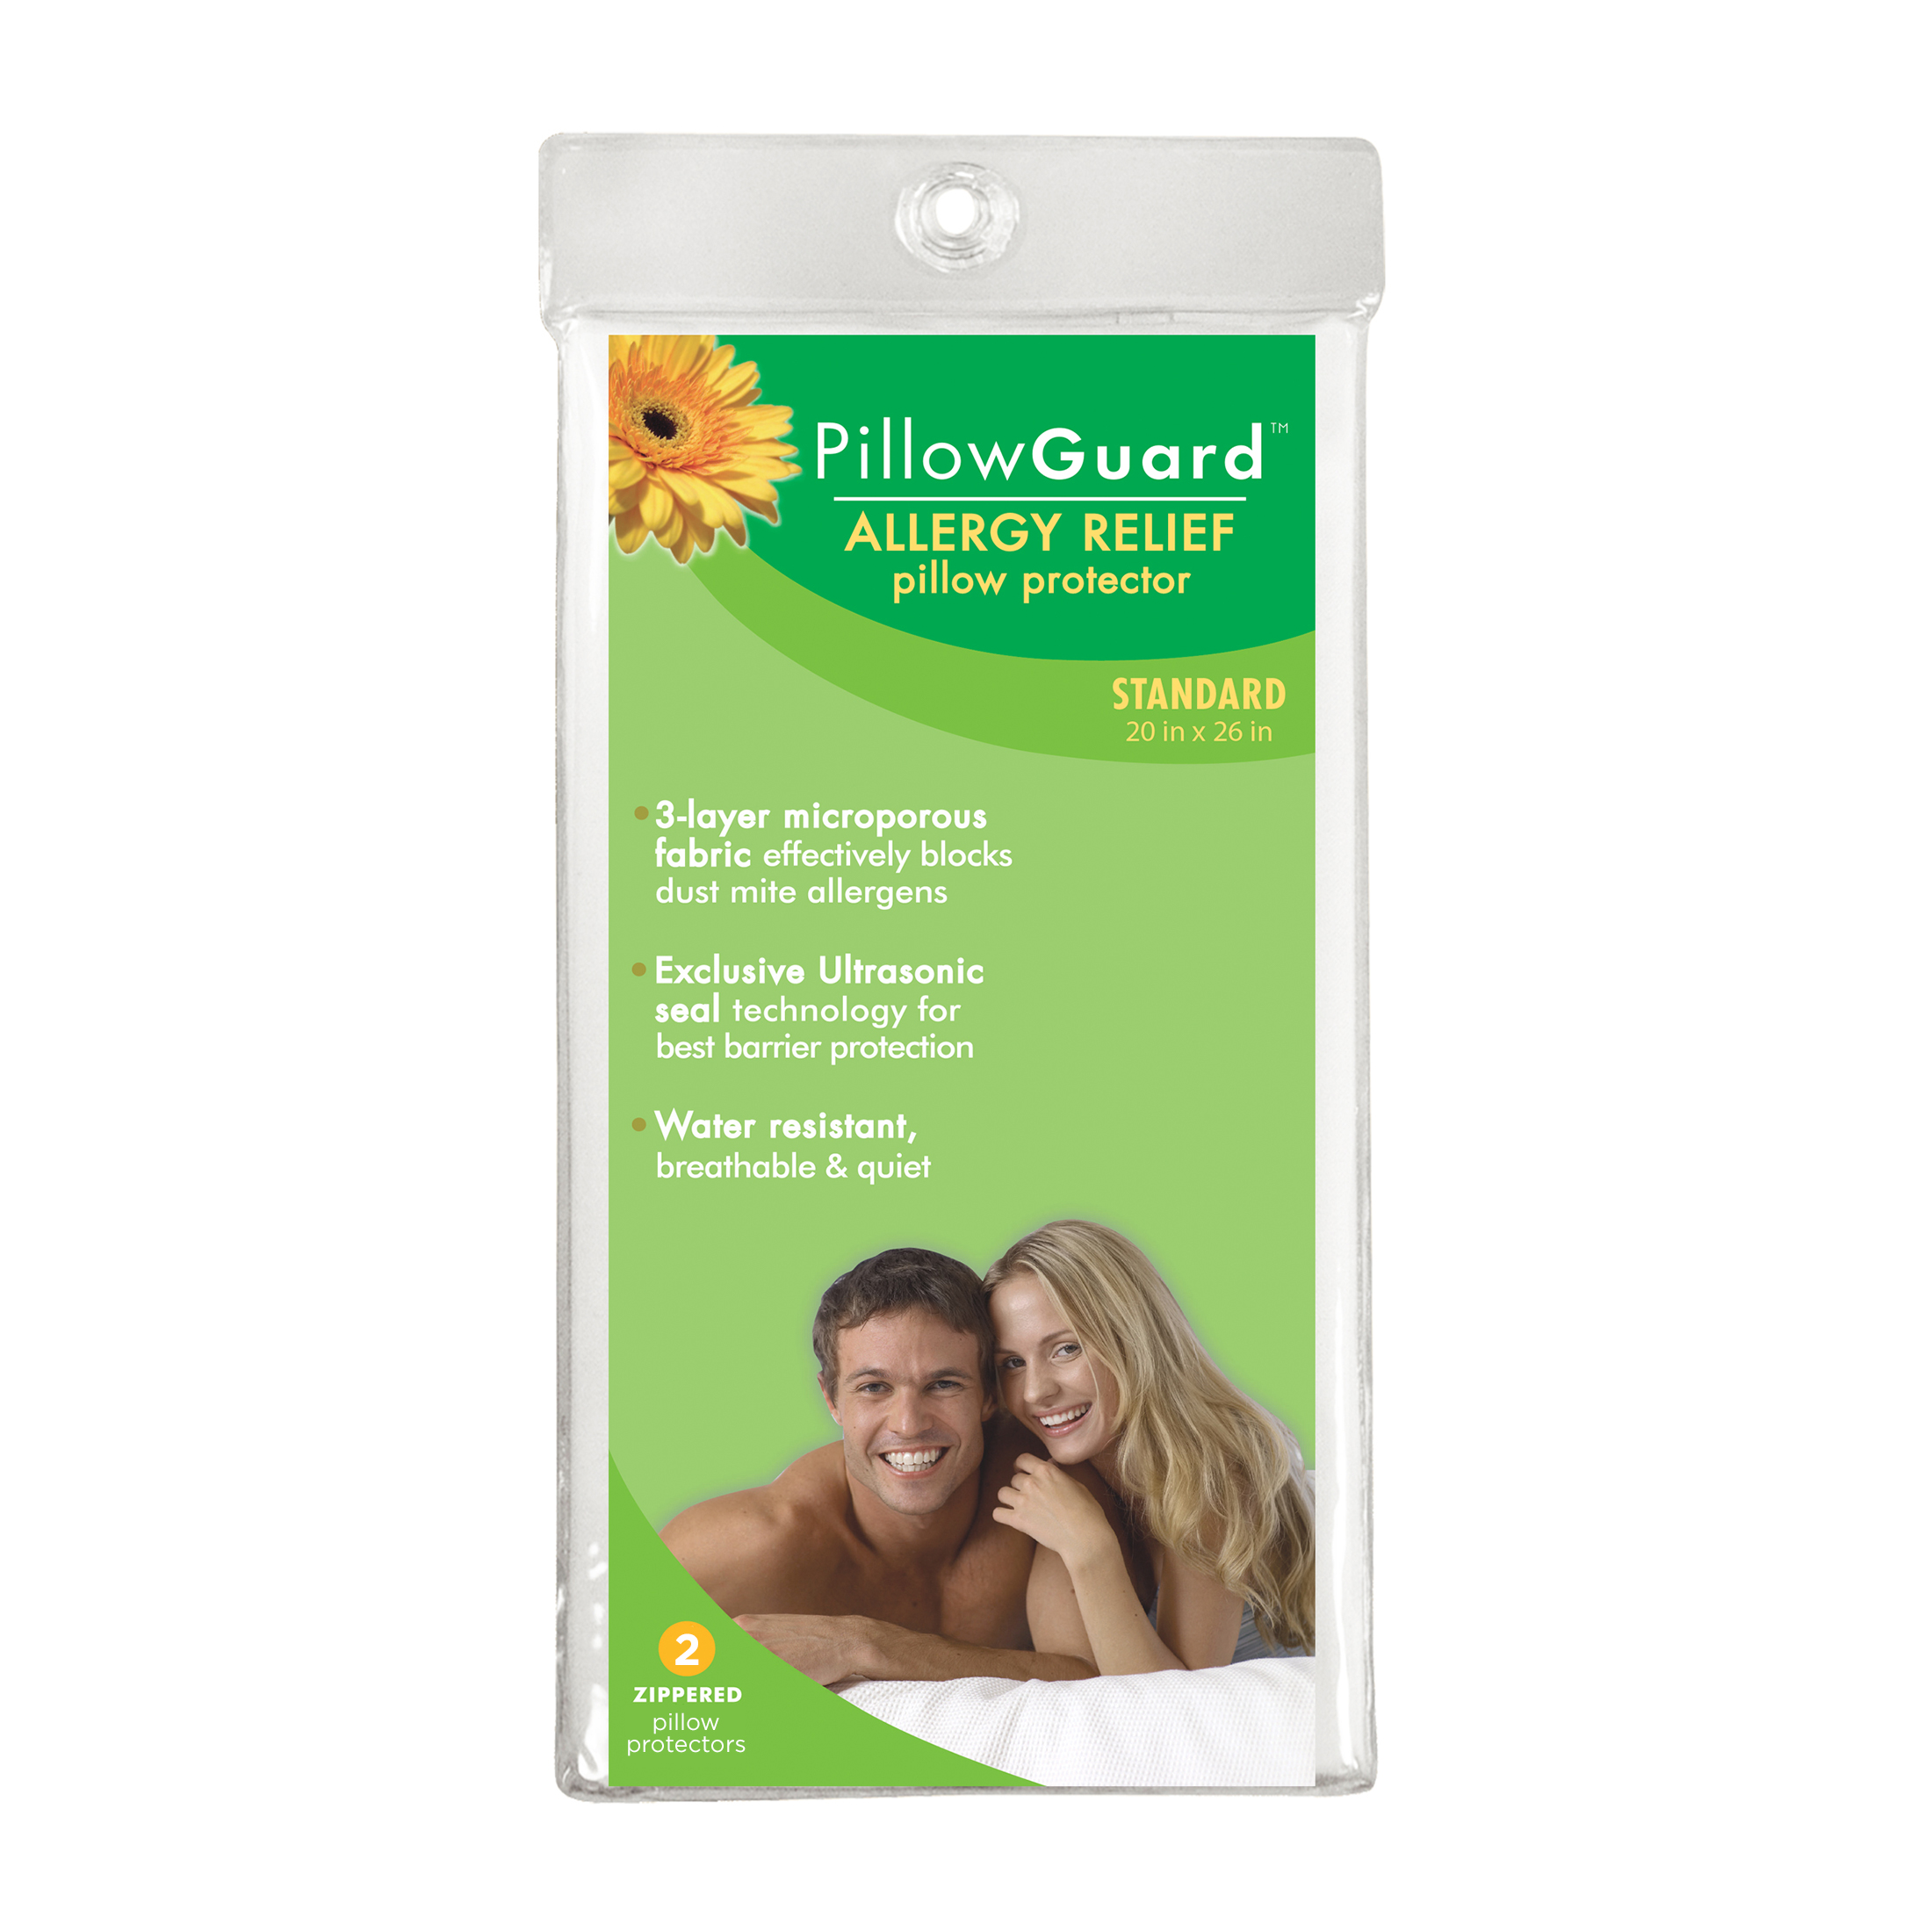 Pillow Guard Allergy Relief Water Resistant Zippered Pillow Protectors, Standard, 2 Pack - image 1 of 7